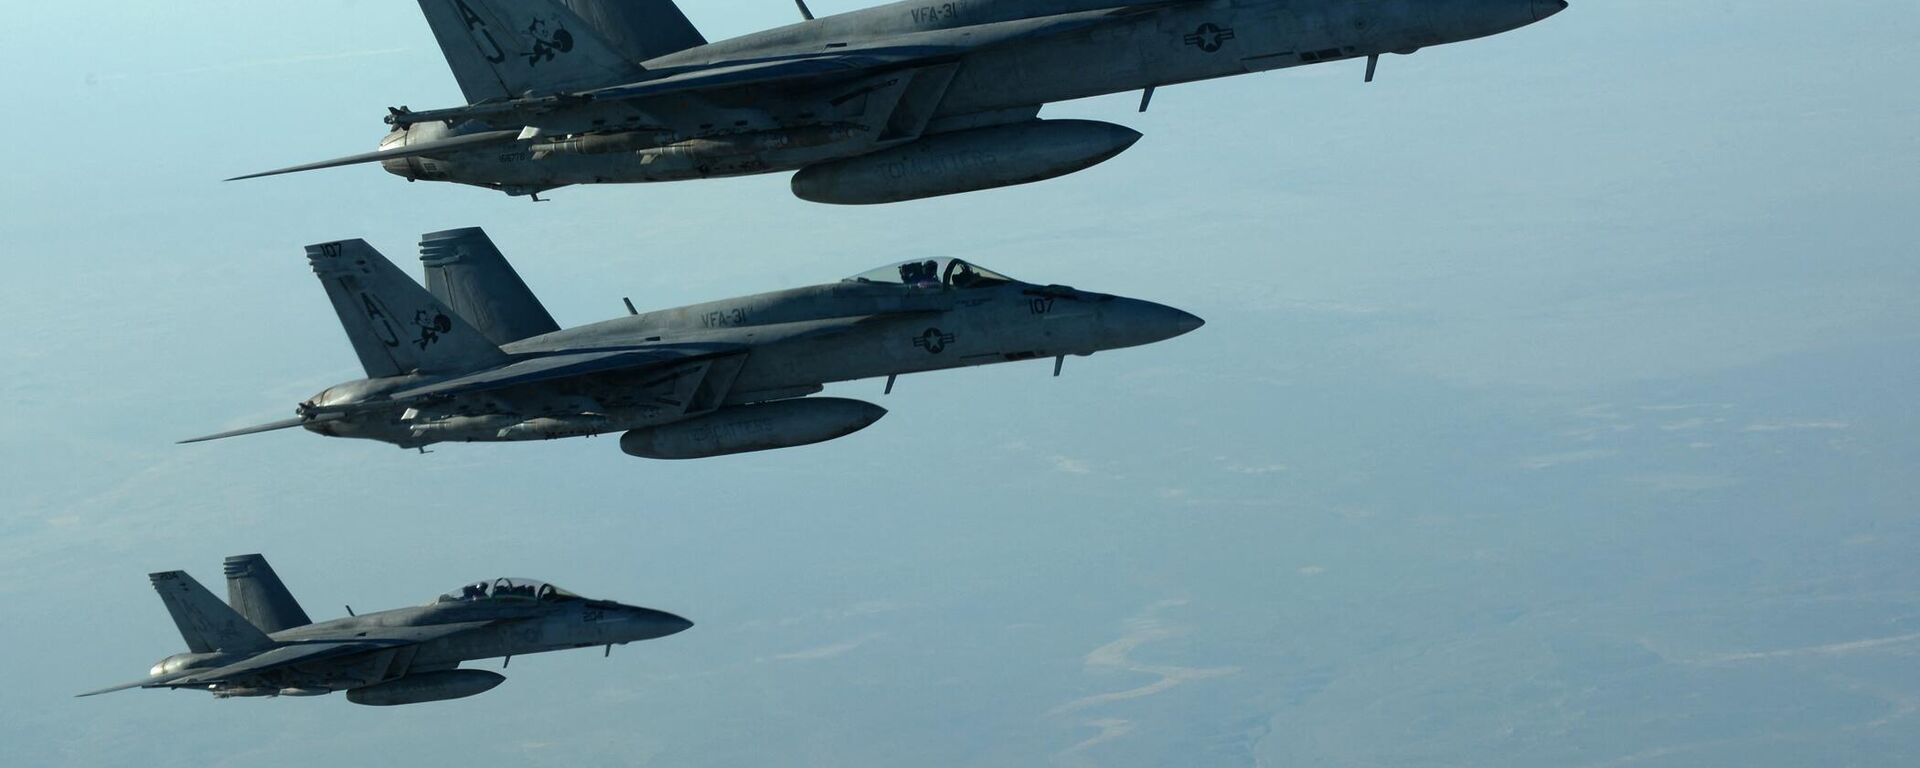 This US Air Forces Central Command photo released by the Defense Video & Imagery Distribution System (DVIDS) shows a formation of US Navy F-18E Super Hornets in flight after receiving fuel from a KC-135 Stratotanker over northern Iraq, on September 23, 2014 - Sputnik International, 1920, 05.02.2024